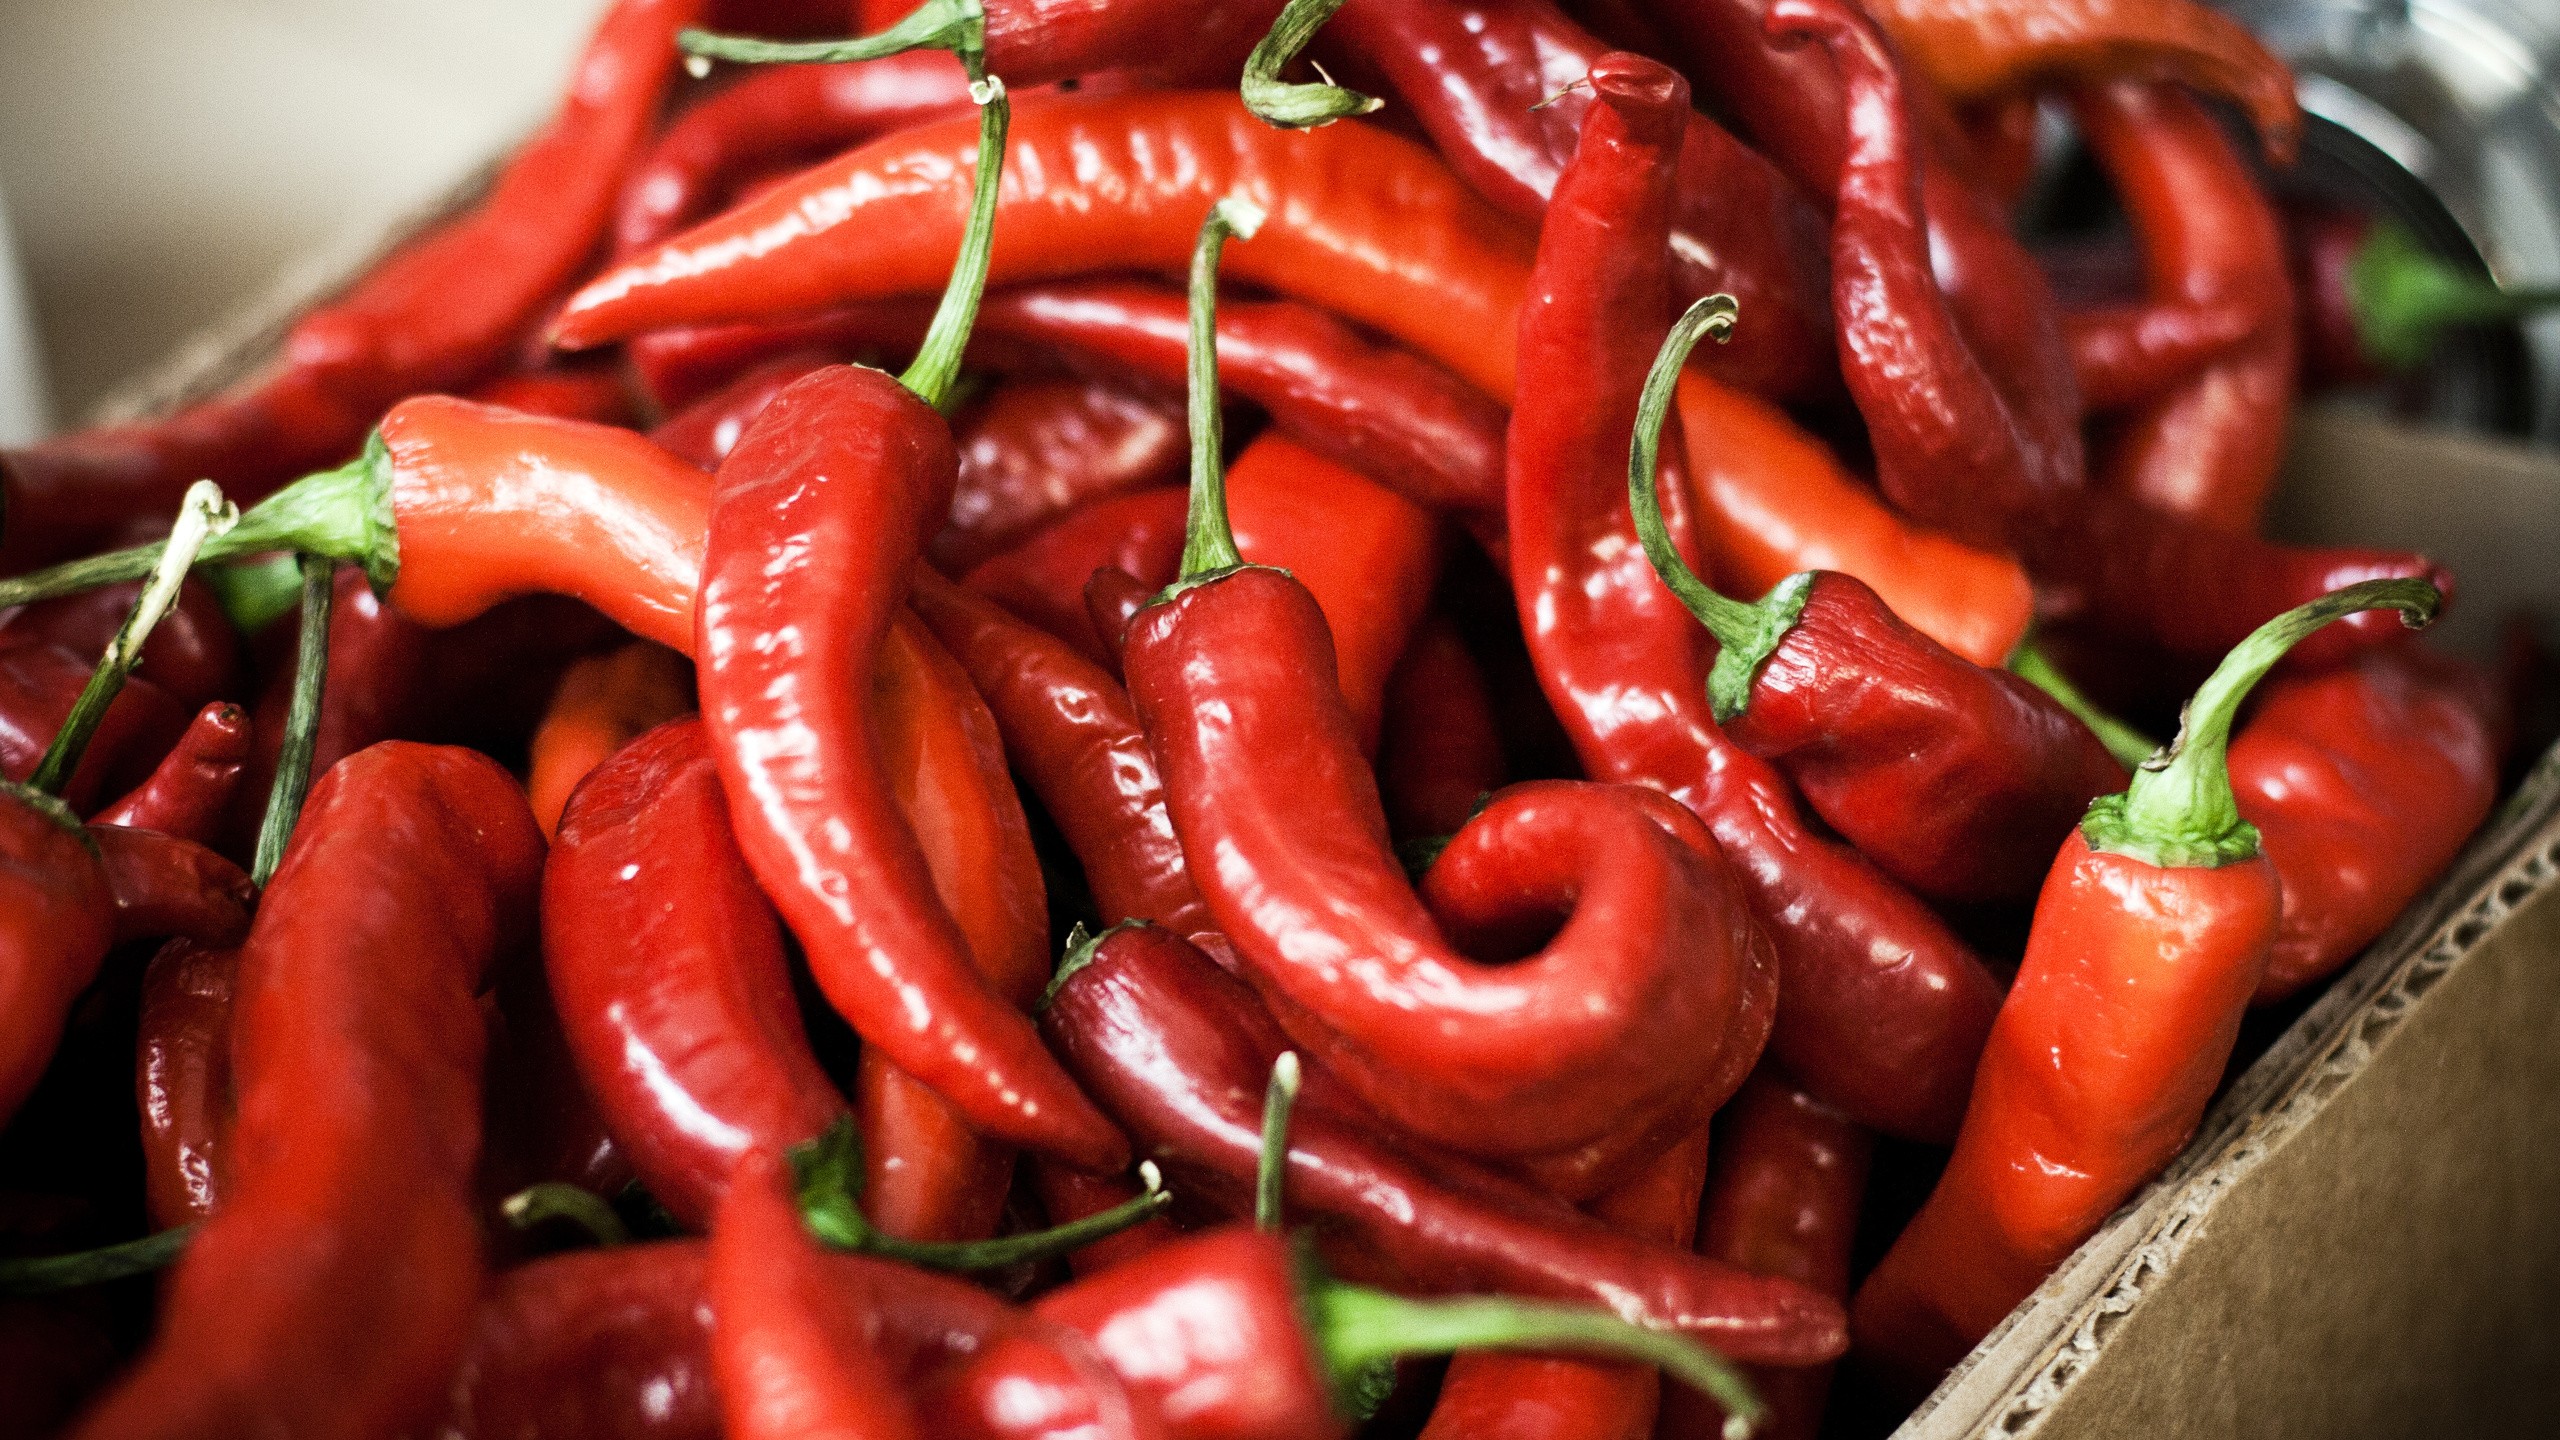 General 2560x1440 chilli peppers red vegetables food closeup still life